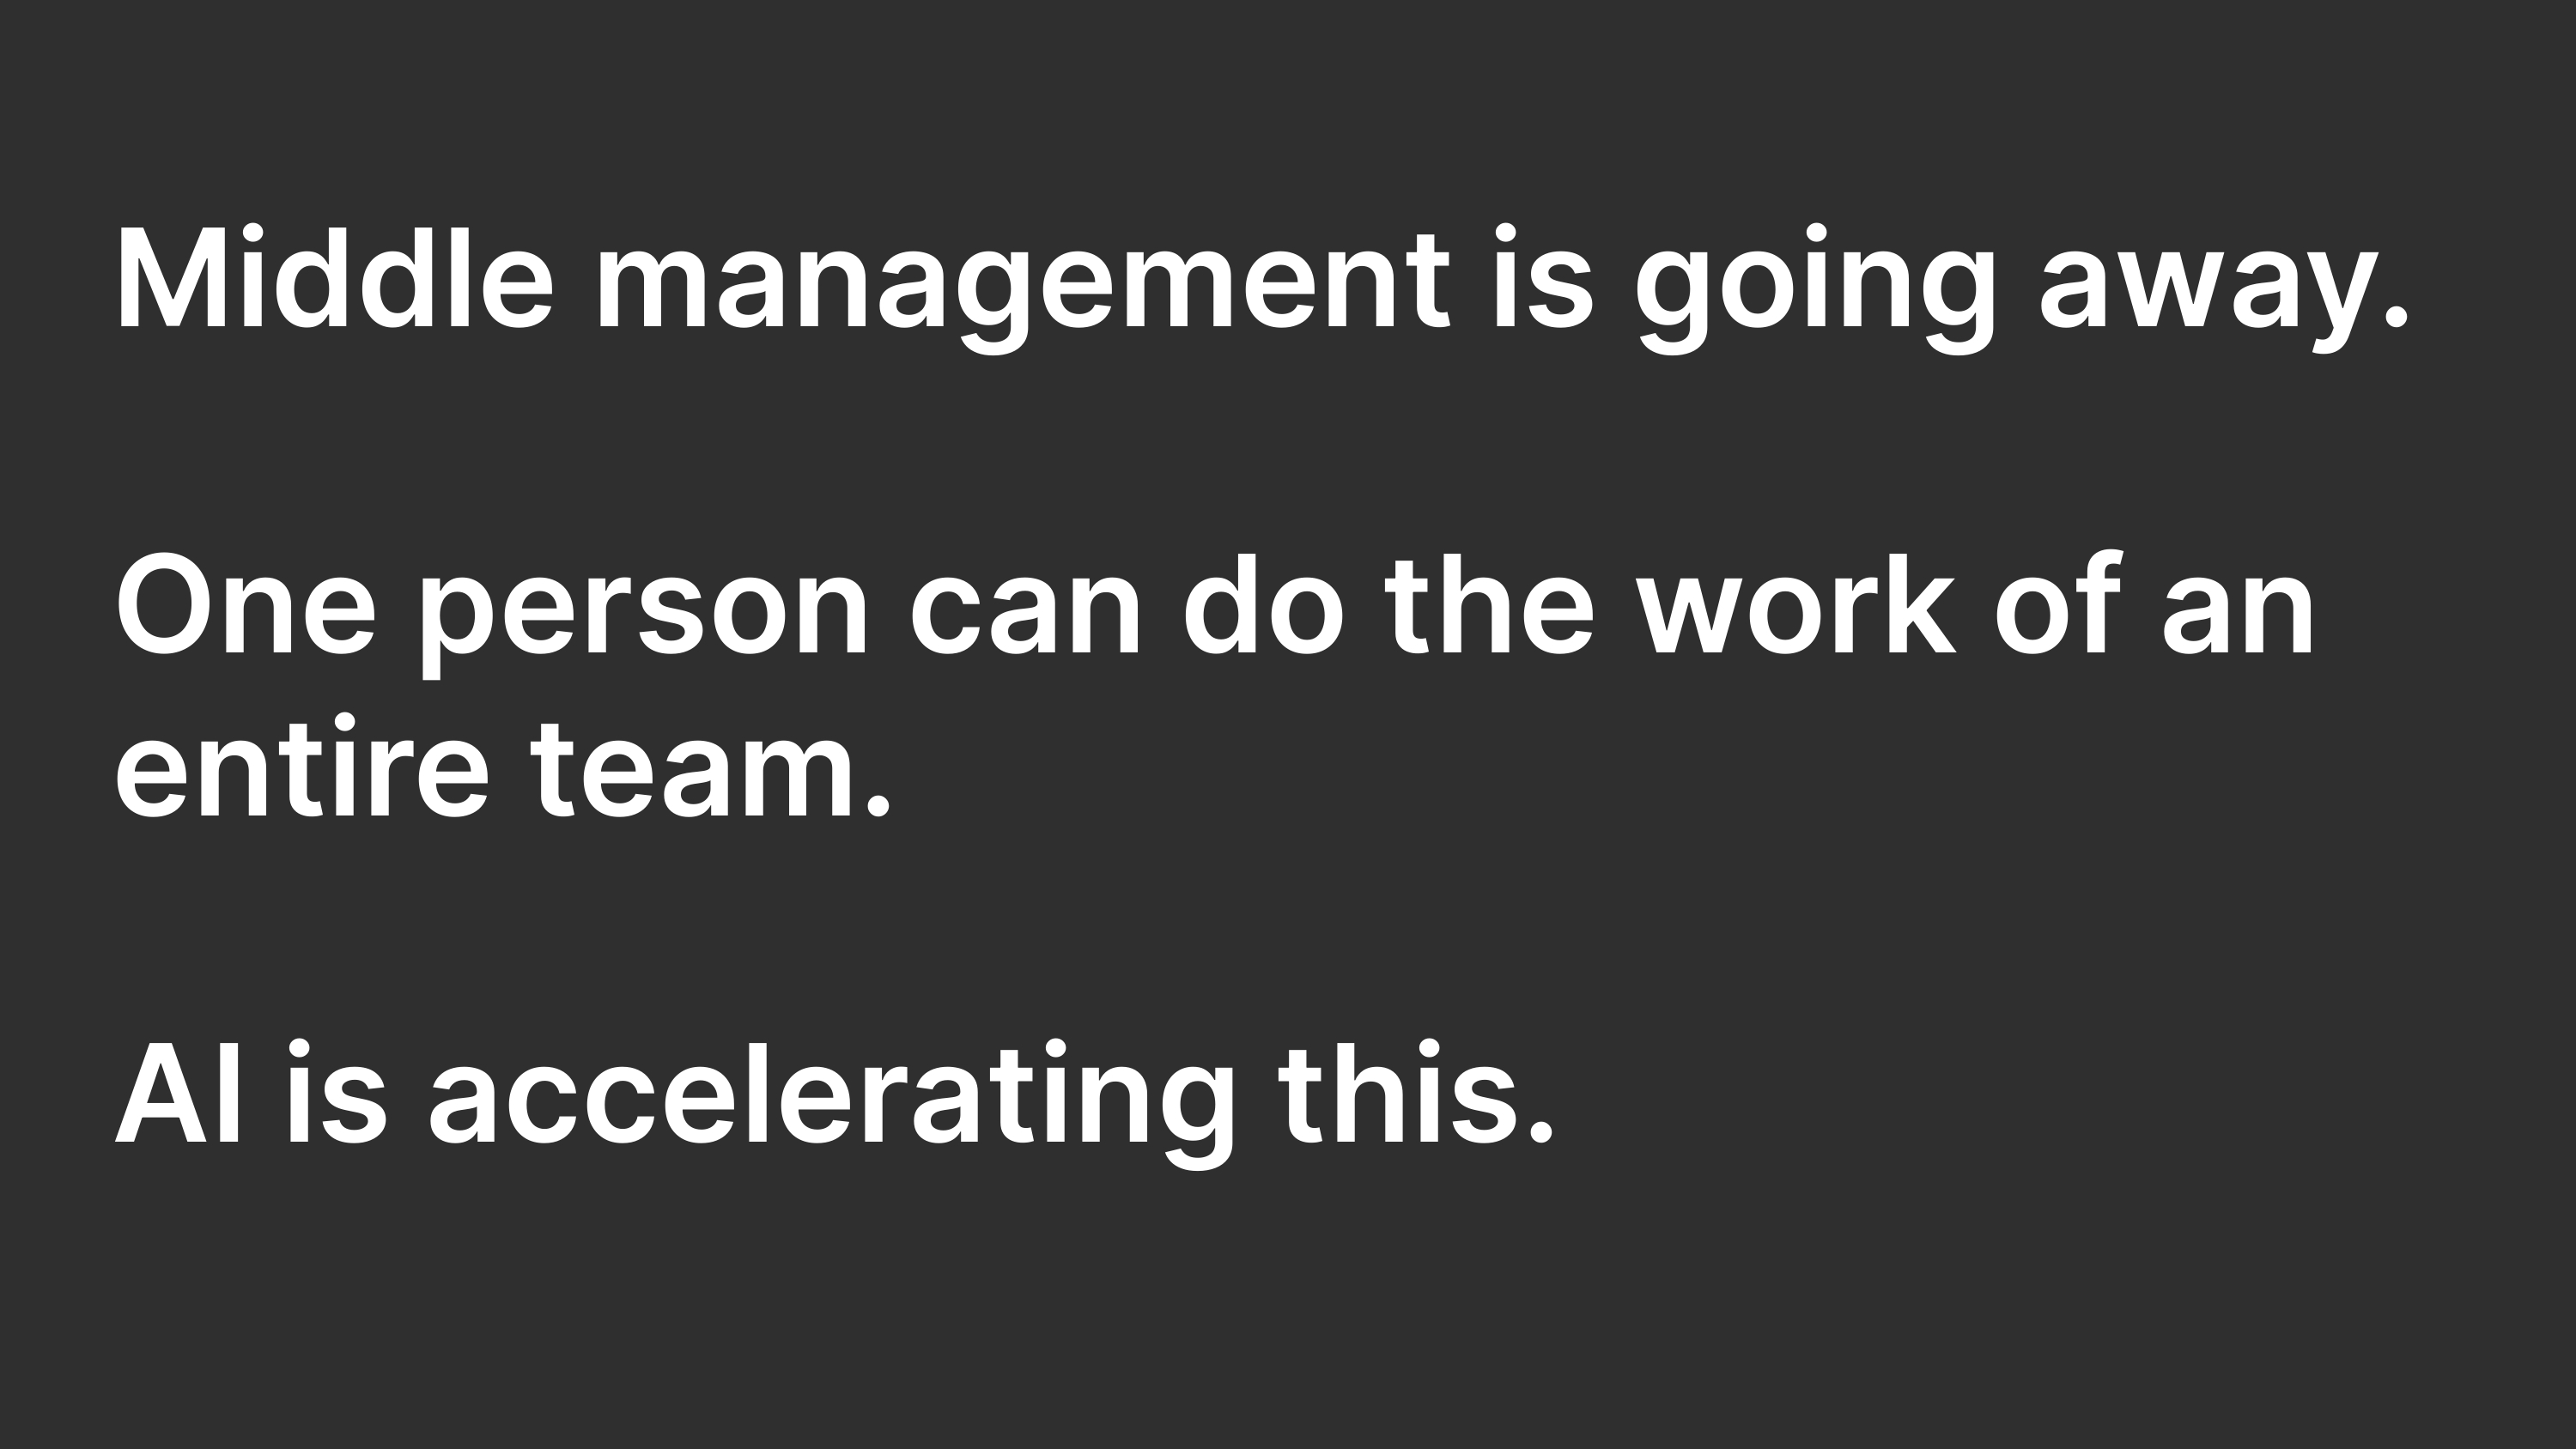 Middle management is going away. One person can do the work of an entire team. AI is accelerating this.